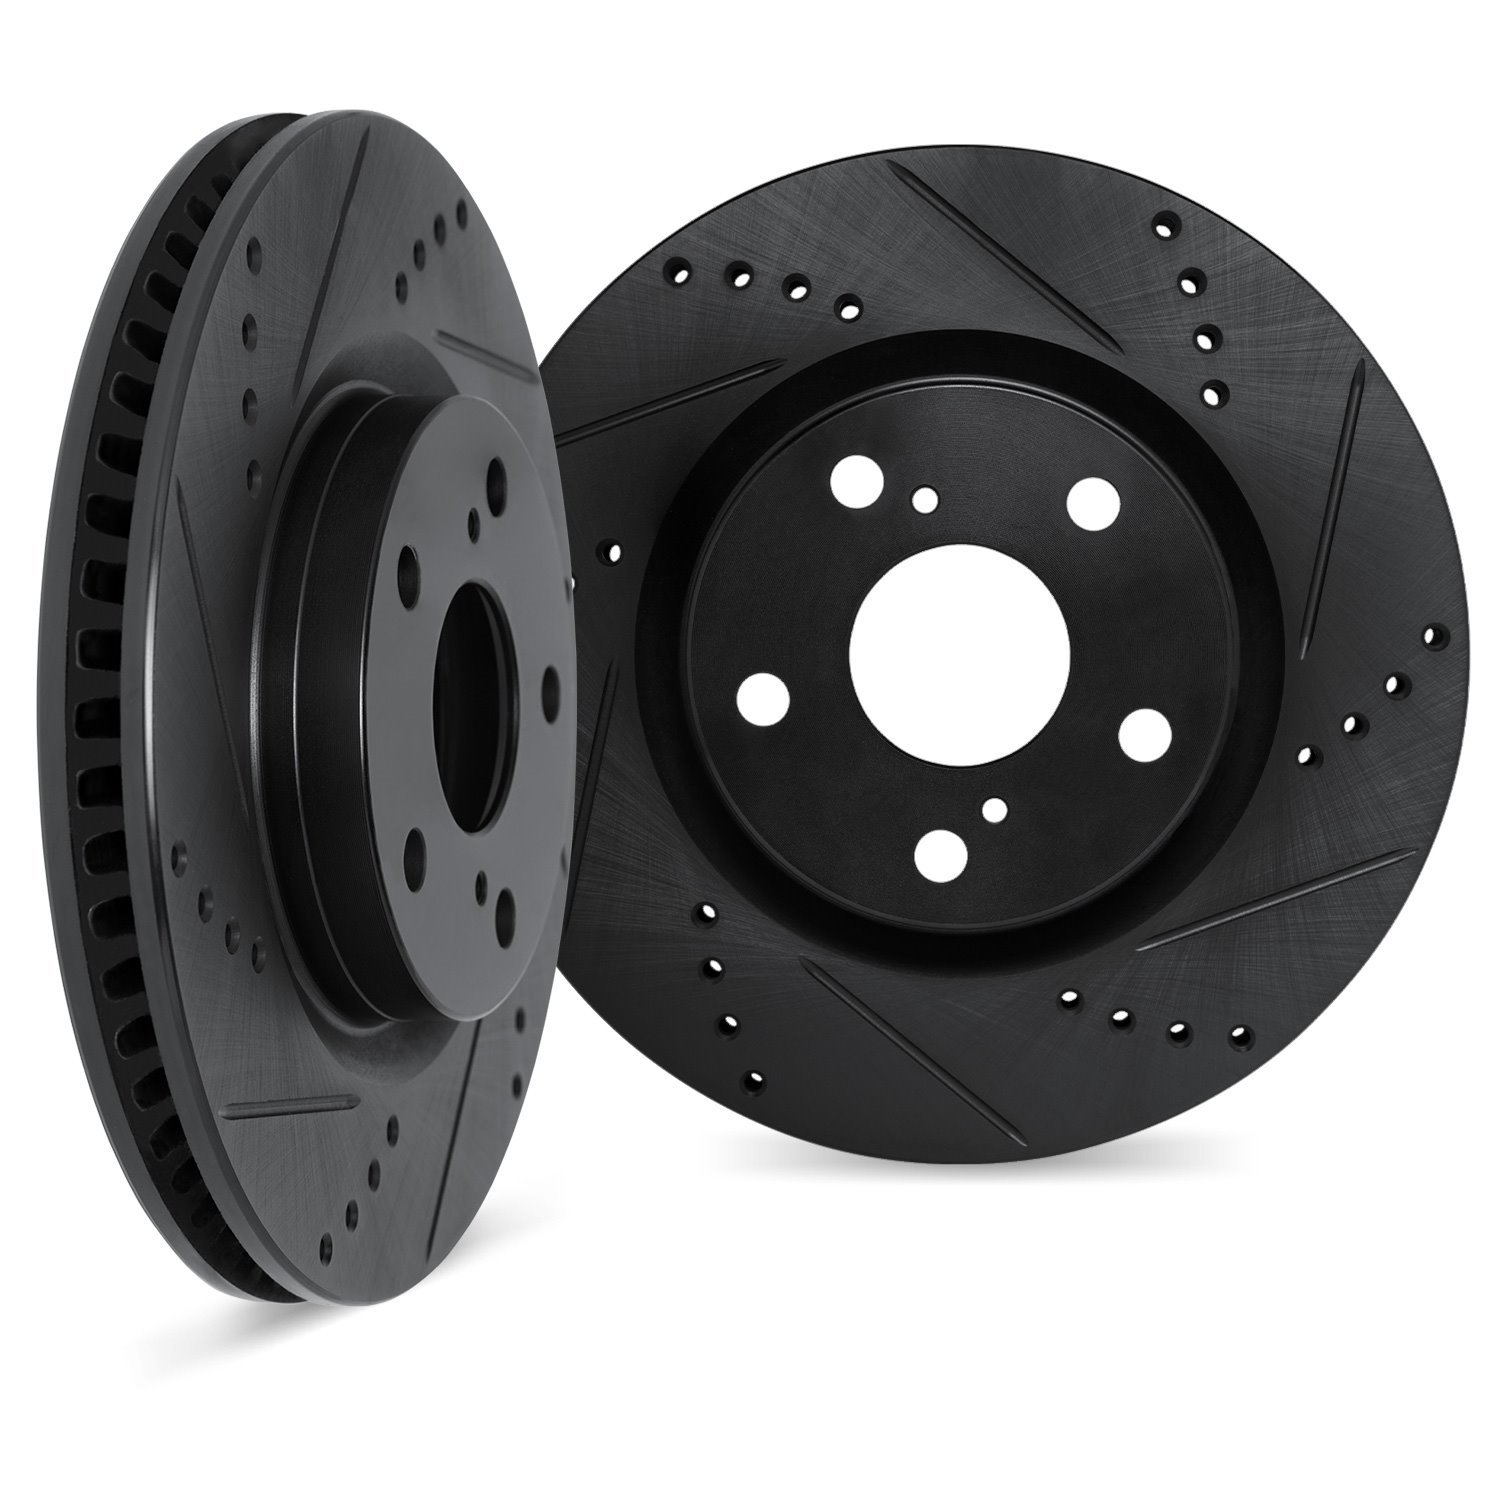 Drilled/Slotted Brake Rotors [Black], Fits Select